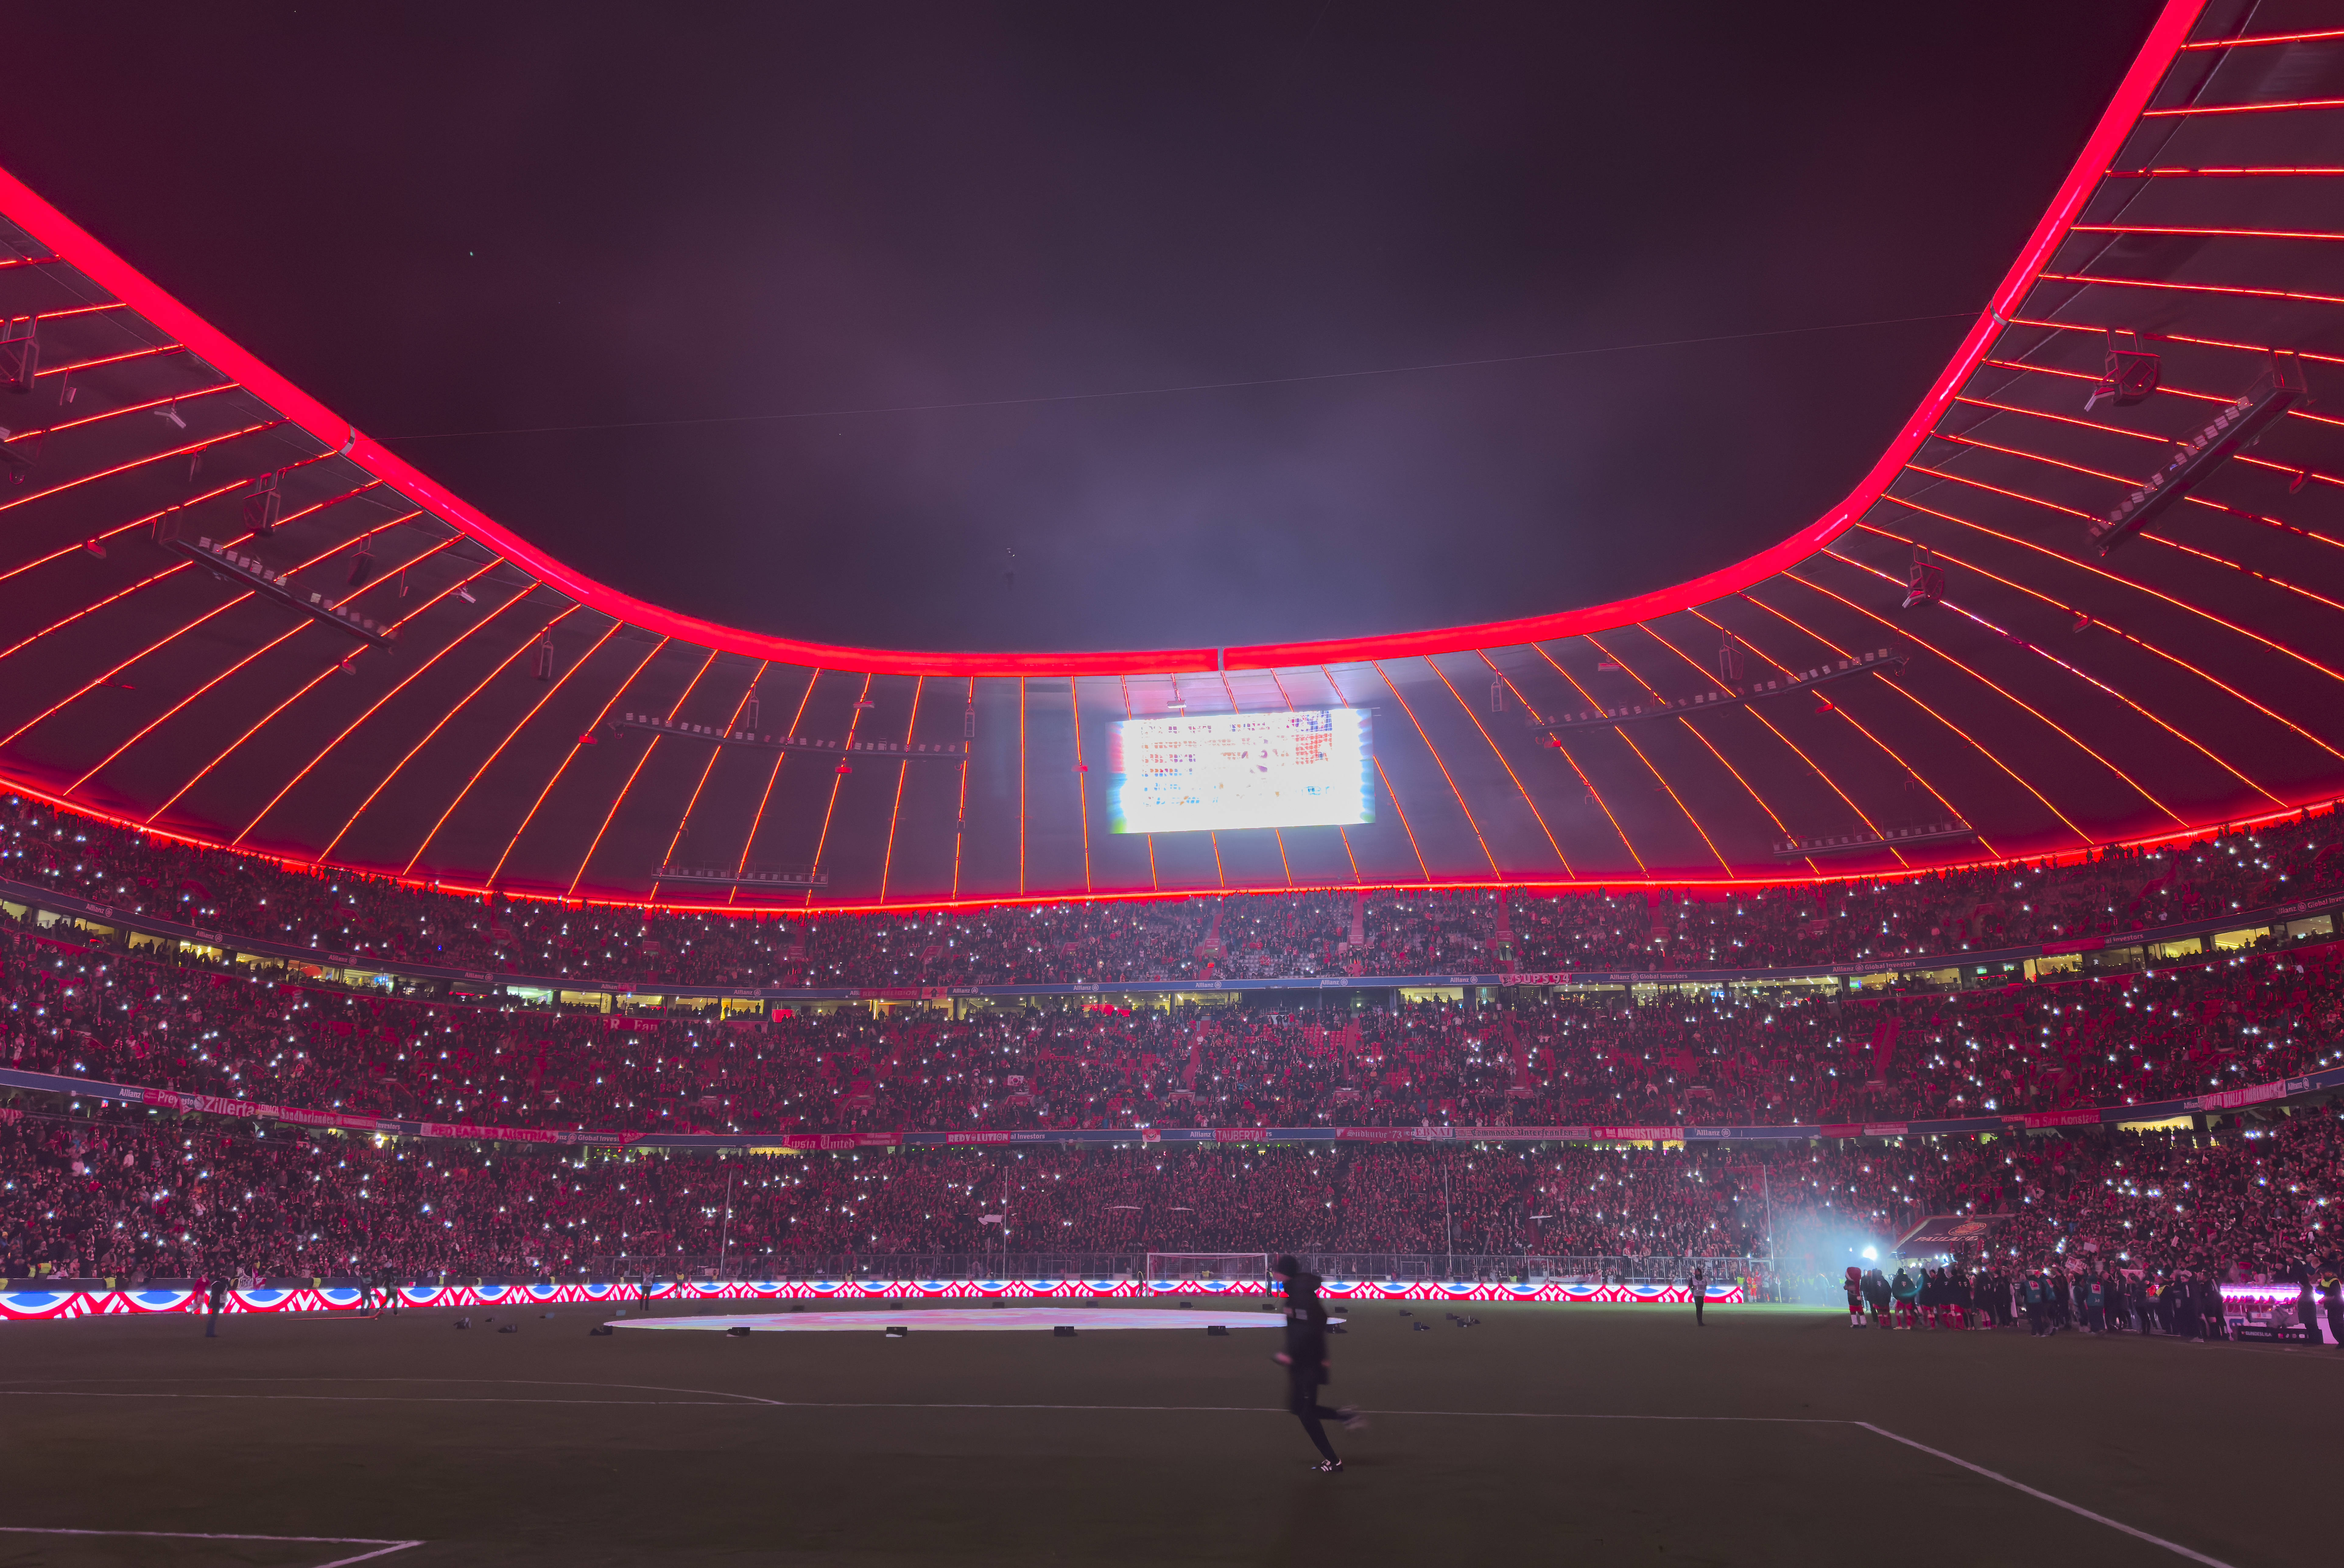 Image of the Allianz Arena during a match